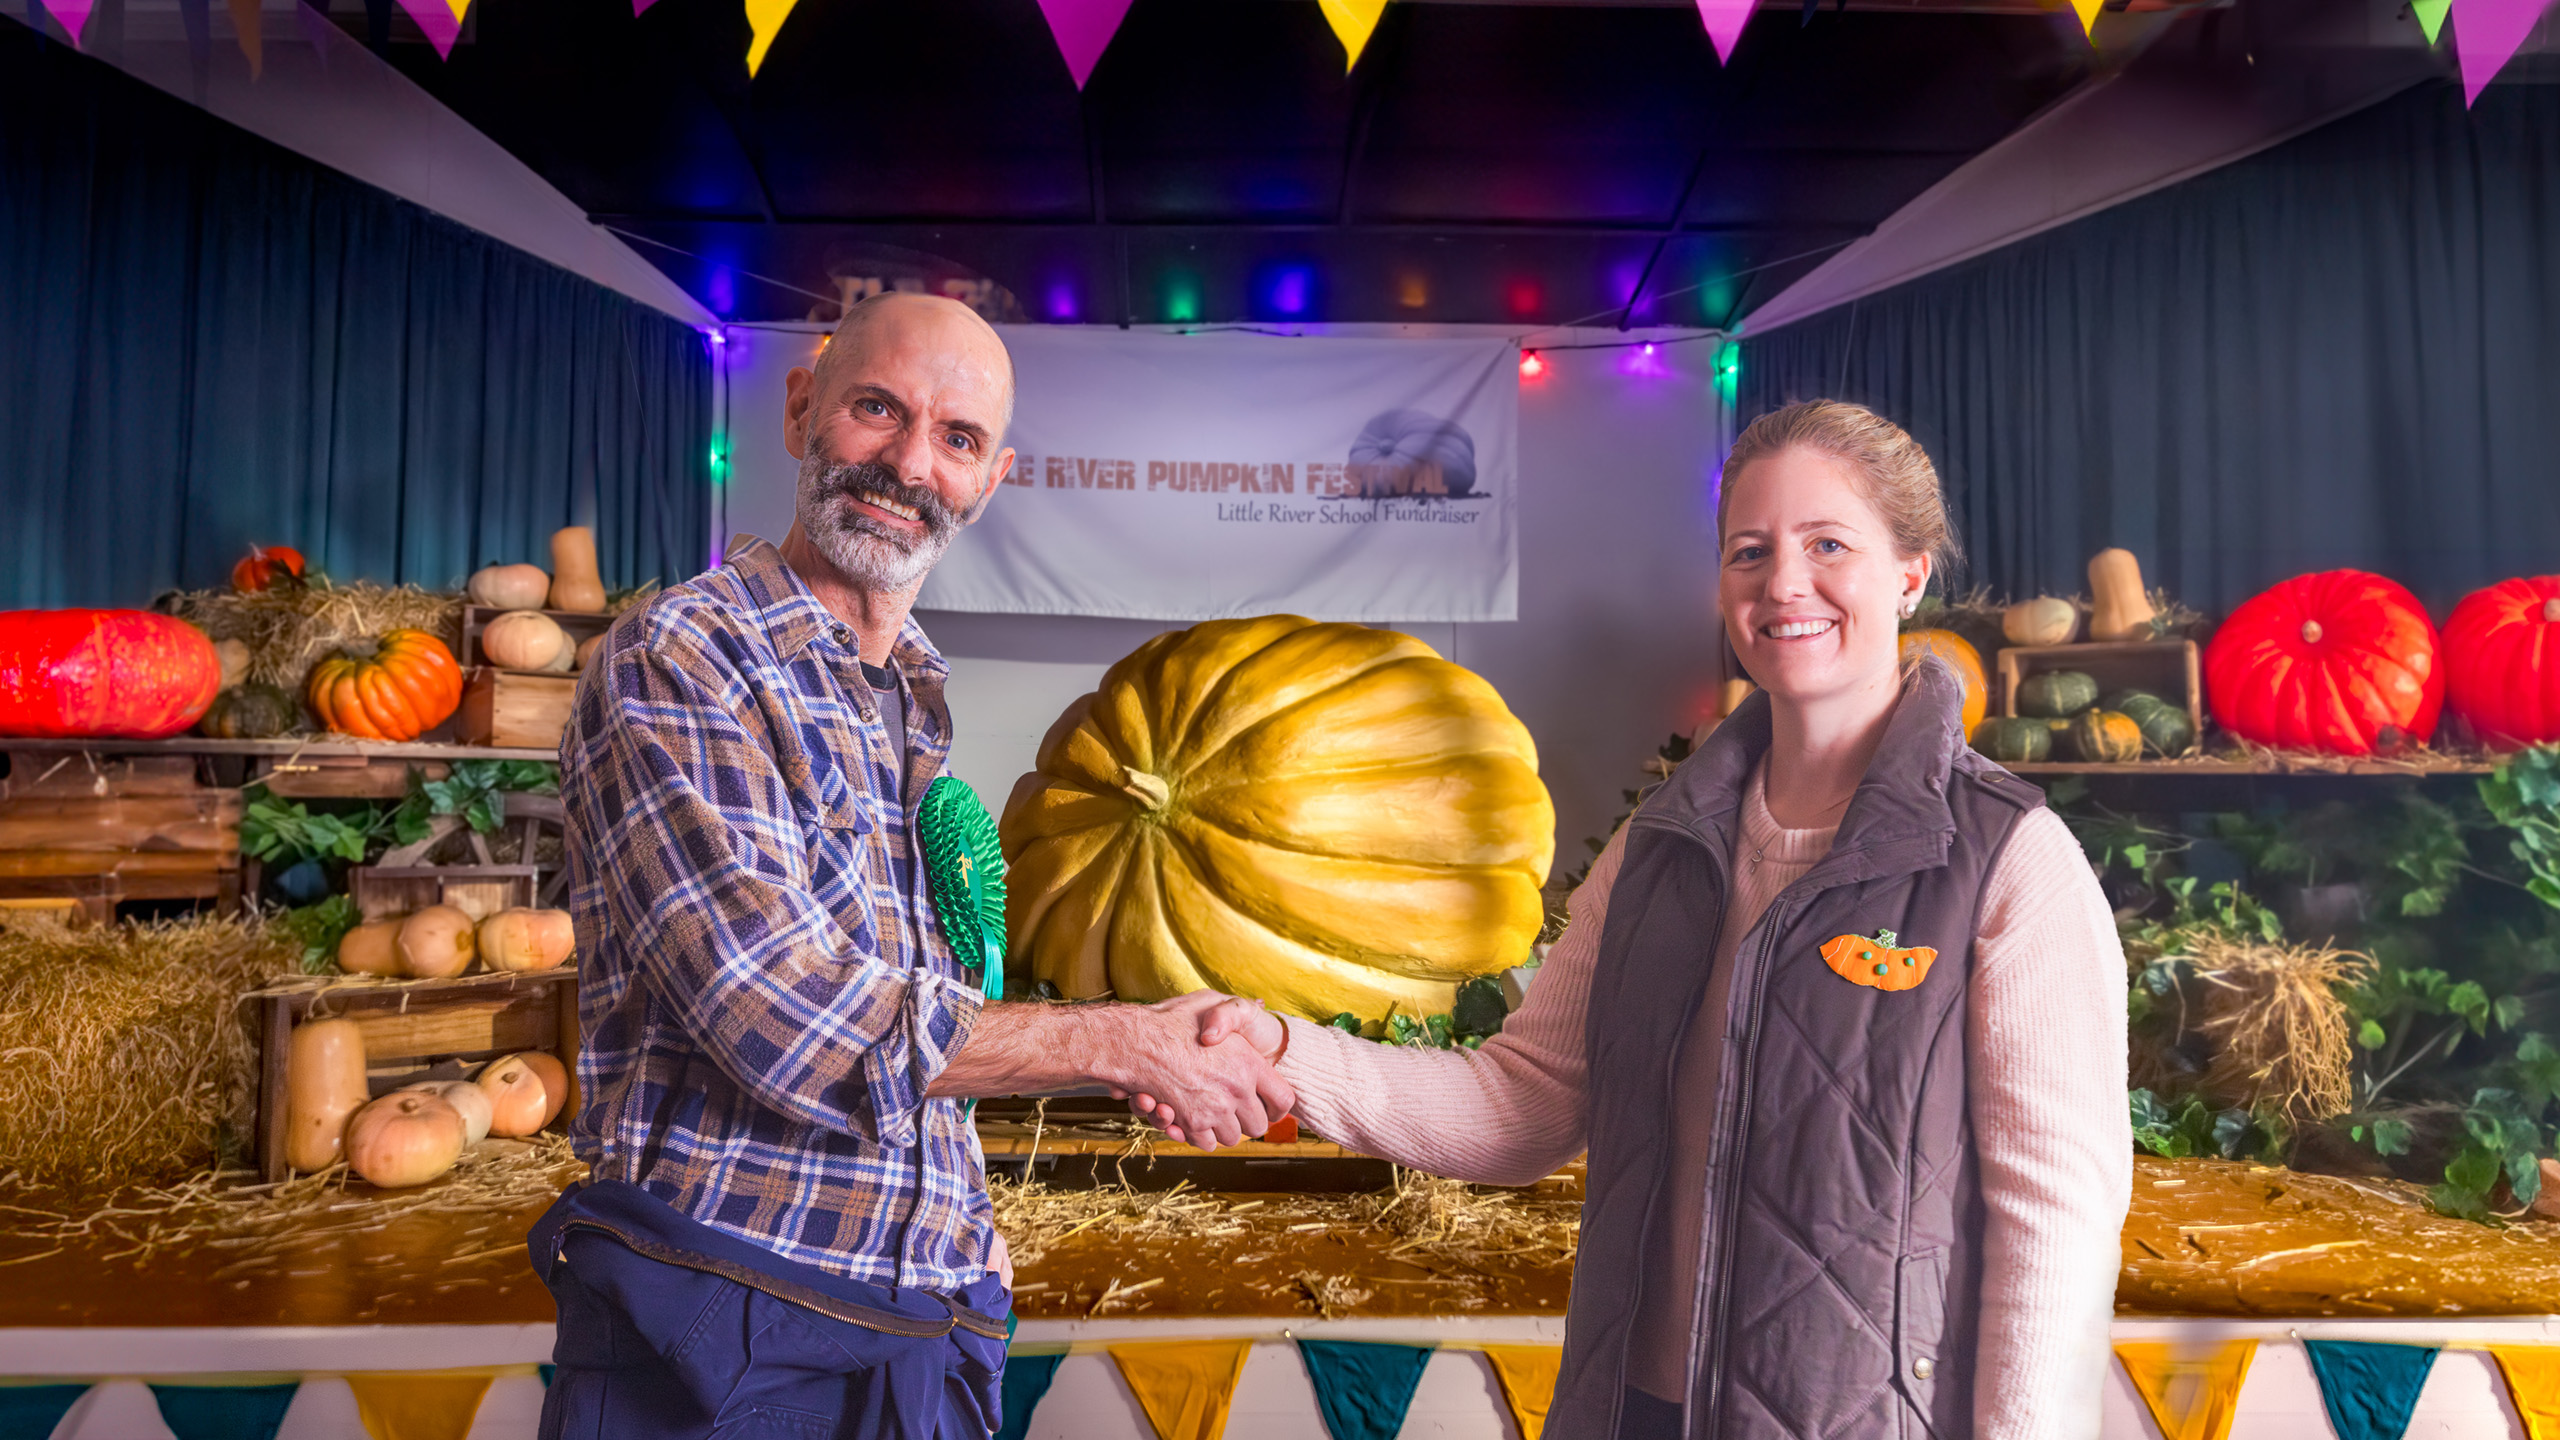 two people standing next to a large pumpkin shaking hands